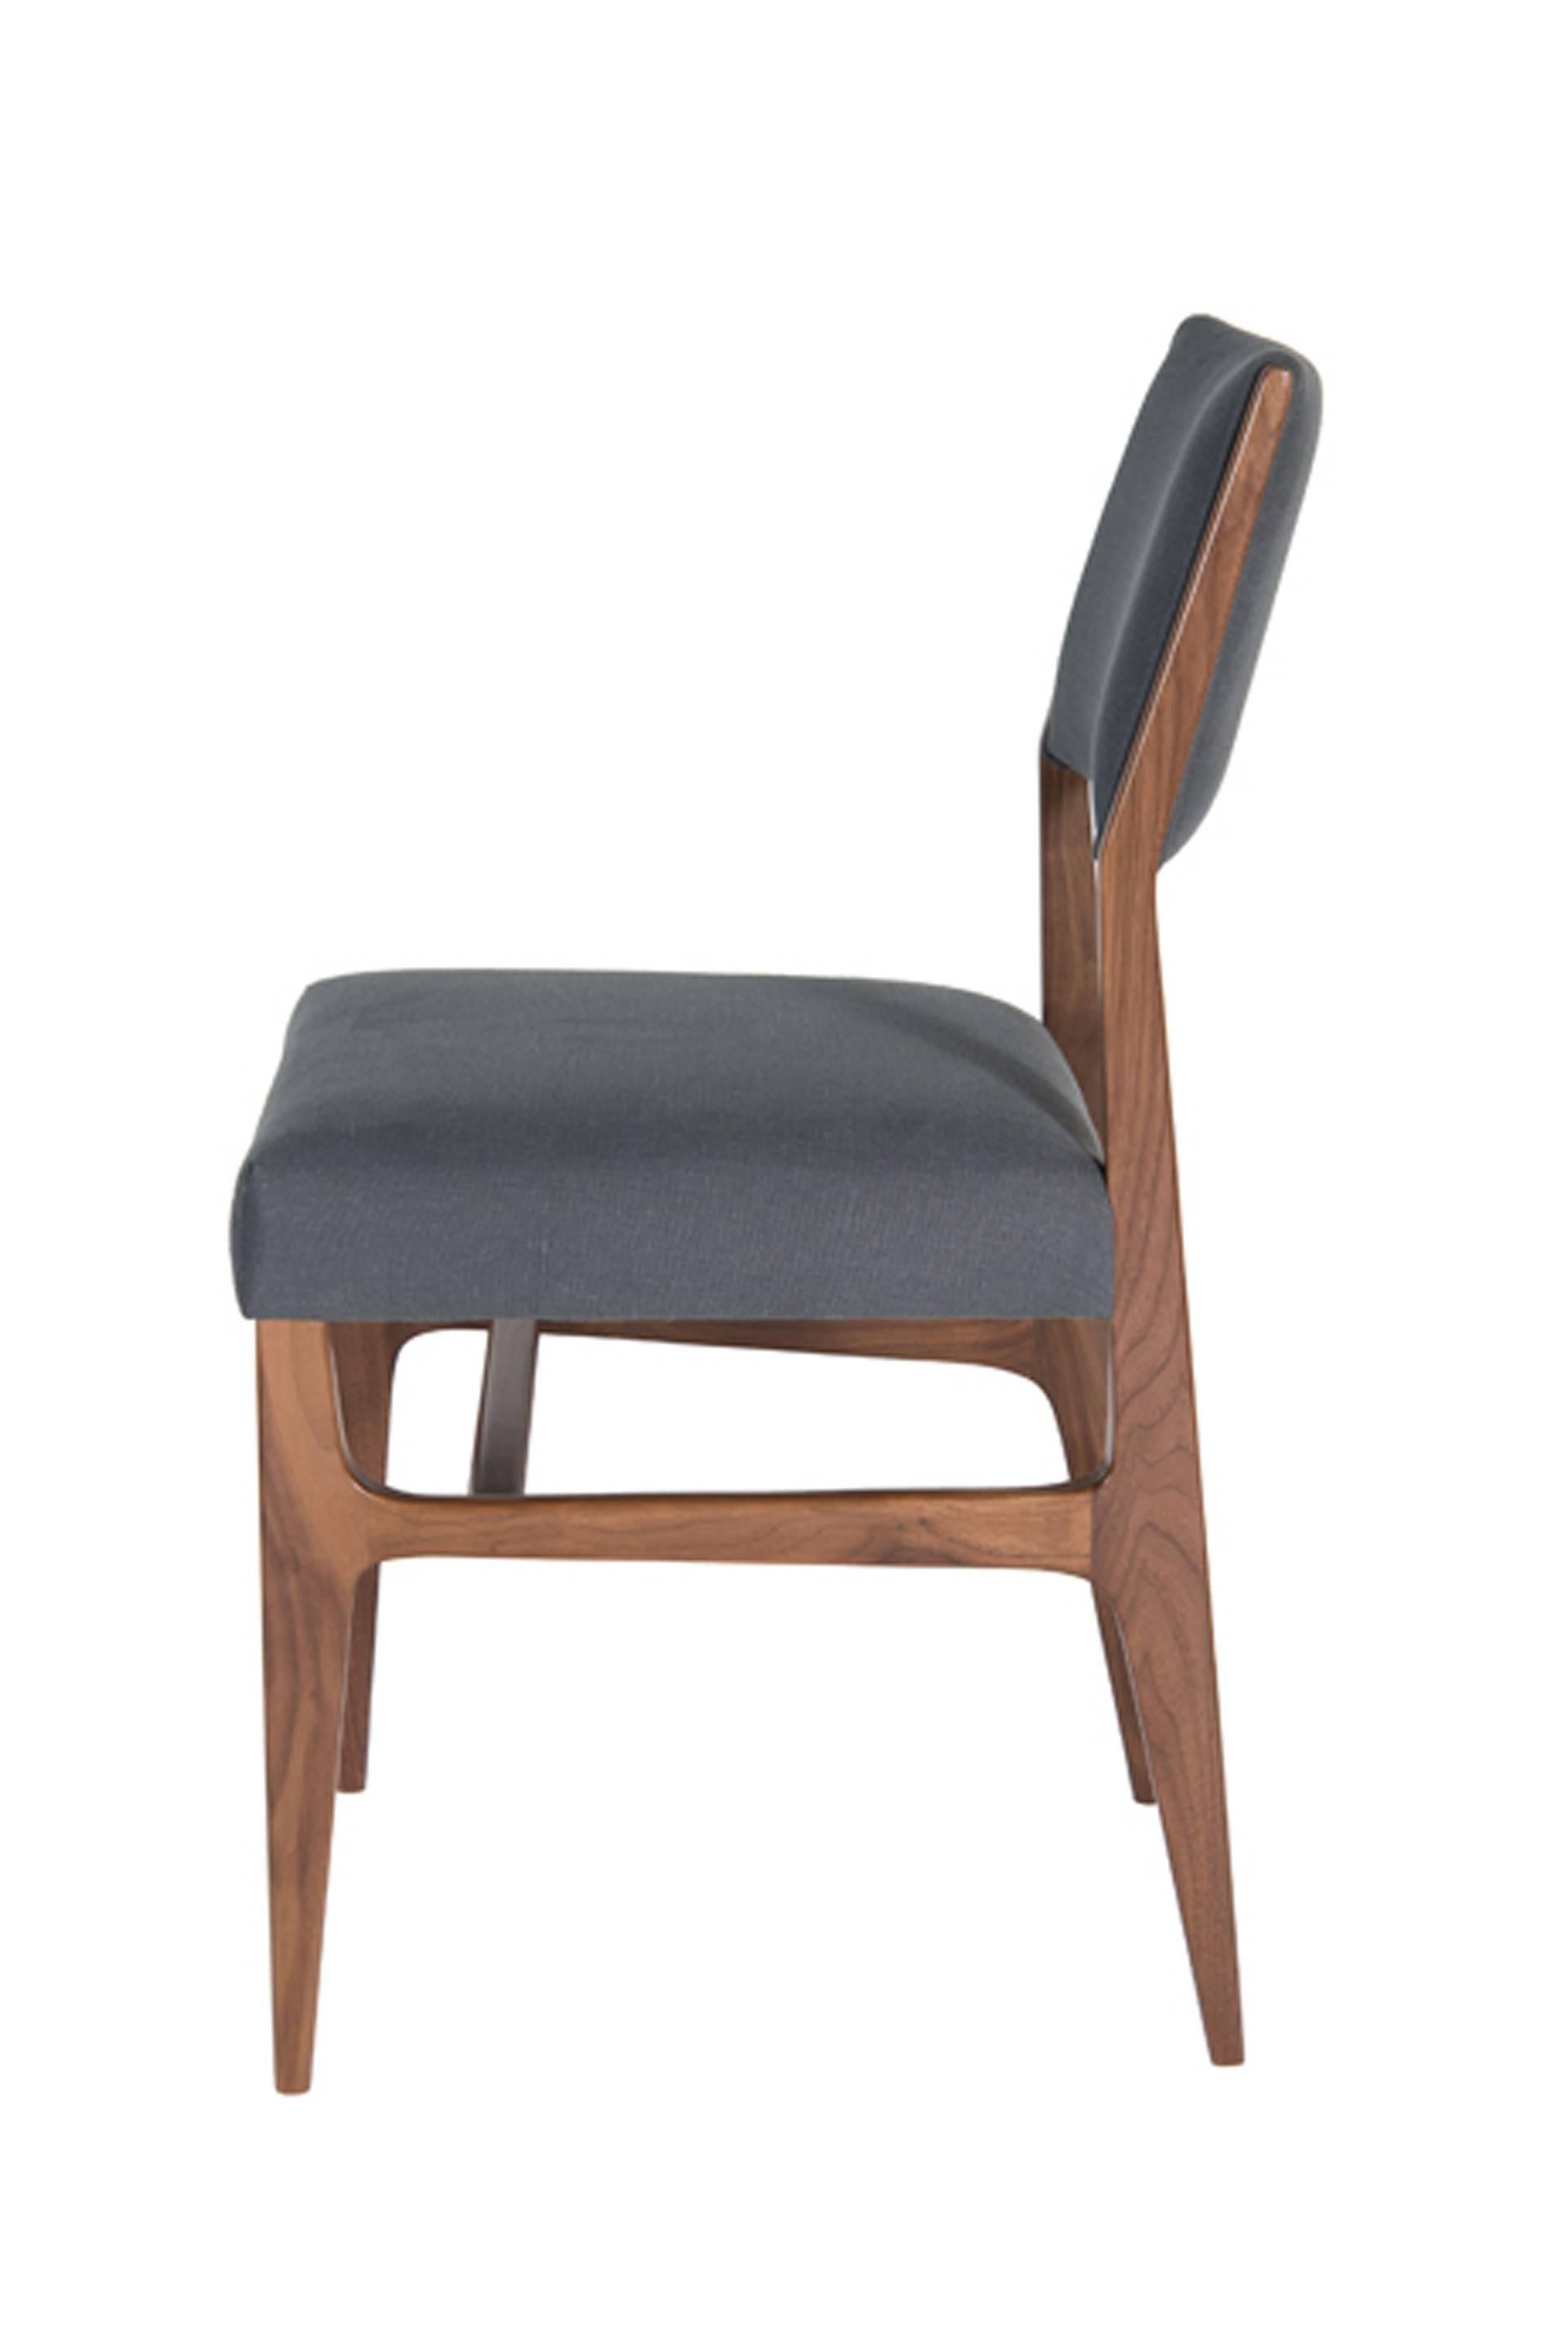 Walnut dining chair upholstered in a natural cotton fabric.

Measures: Seat height 19” 
Seat depth 17” 
COM requirements: 1.5 yards 
5% up-charge for contrasting fabrics and or welting 
COL Requirements:30 sq. feet 
5% percentage up-charge